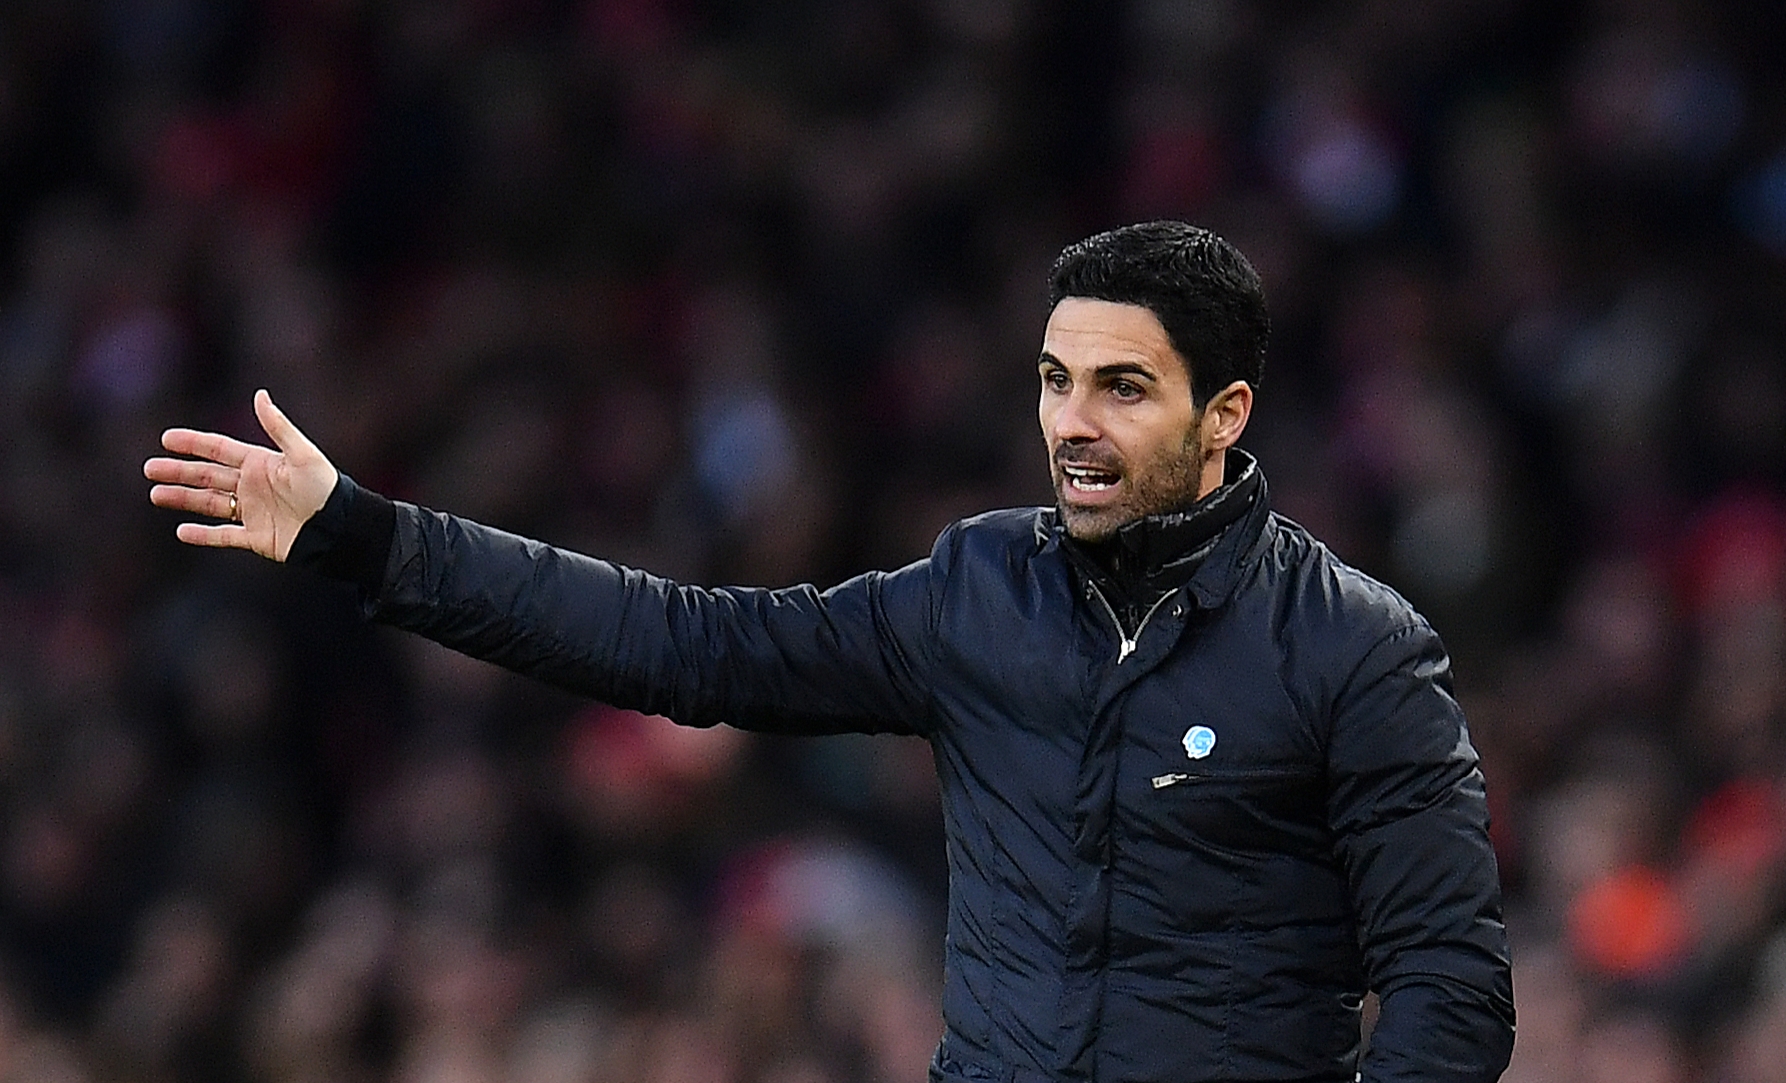 Arteta sends message to Arsenal supporters after testing positive for coronavirus